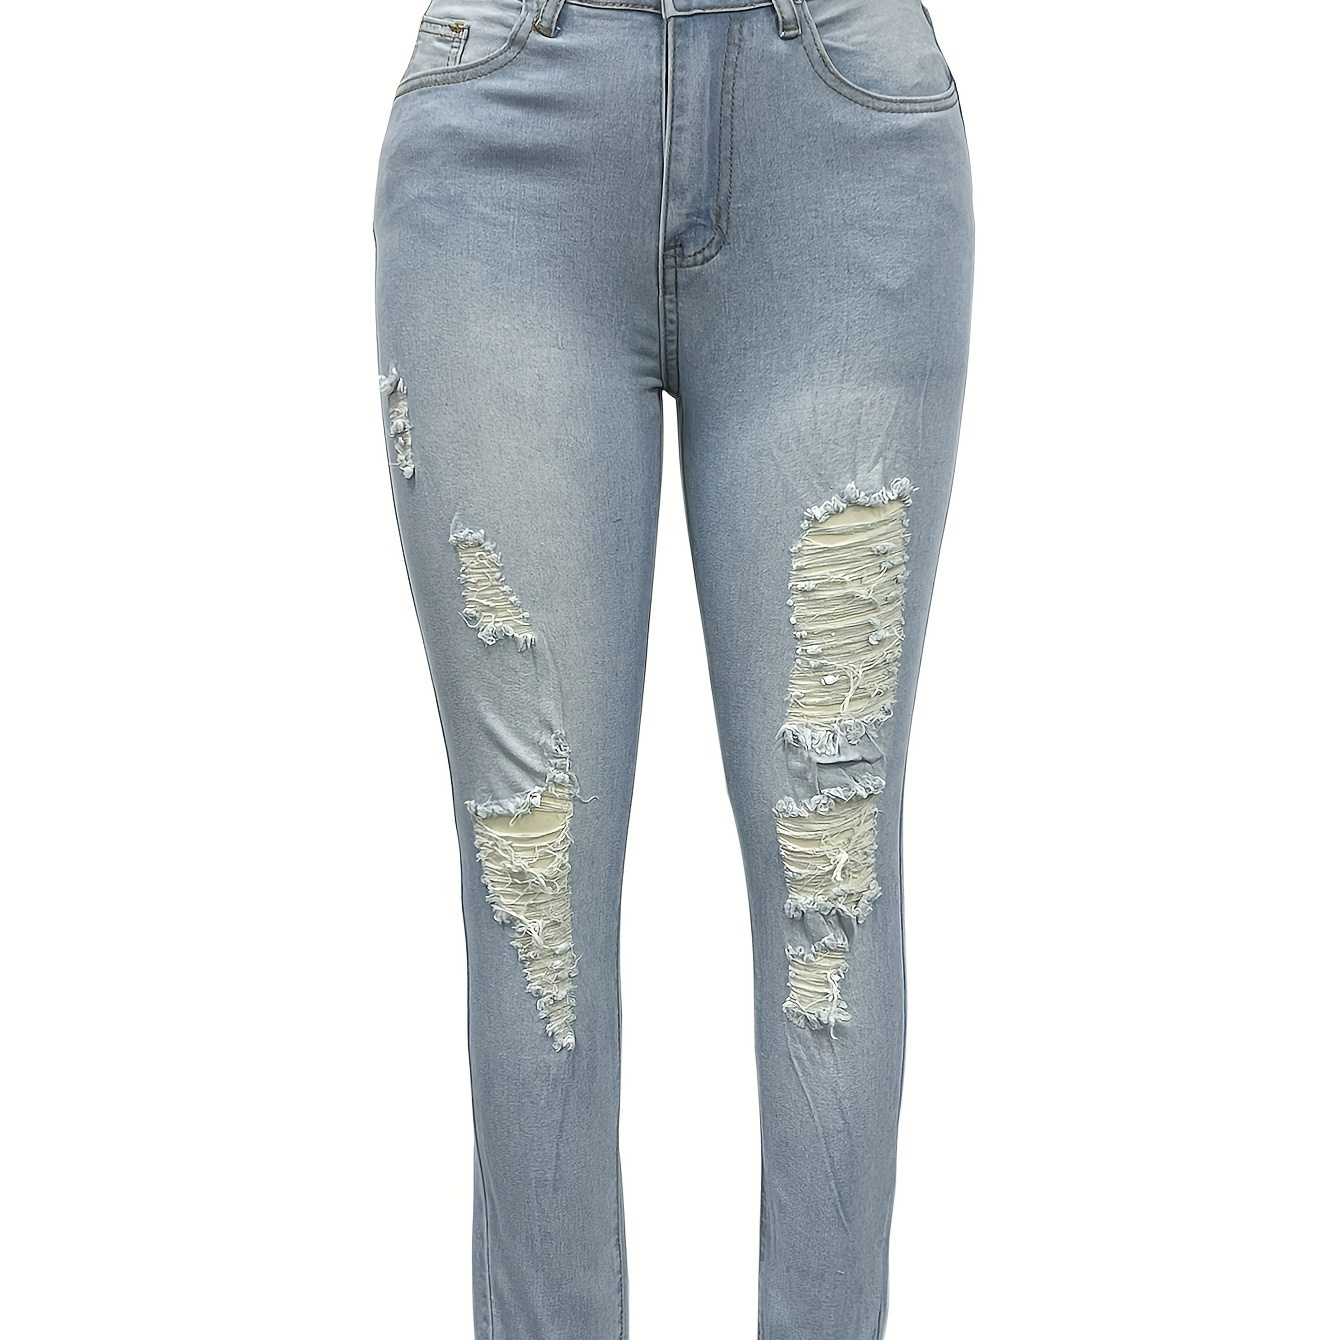 

Ripped High Rise Skinny Jeans, Light Washed Blue Stretchy Sexy Distressed Curvy Denim Pants, Women's Denim Jeans & Clothing